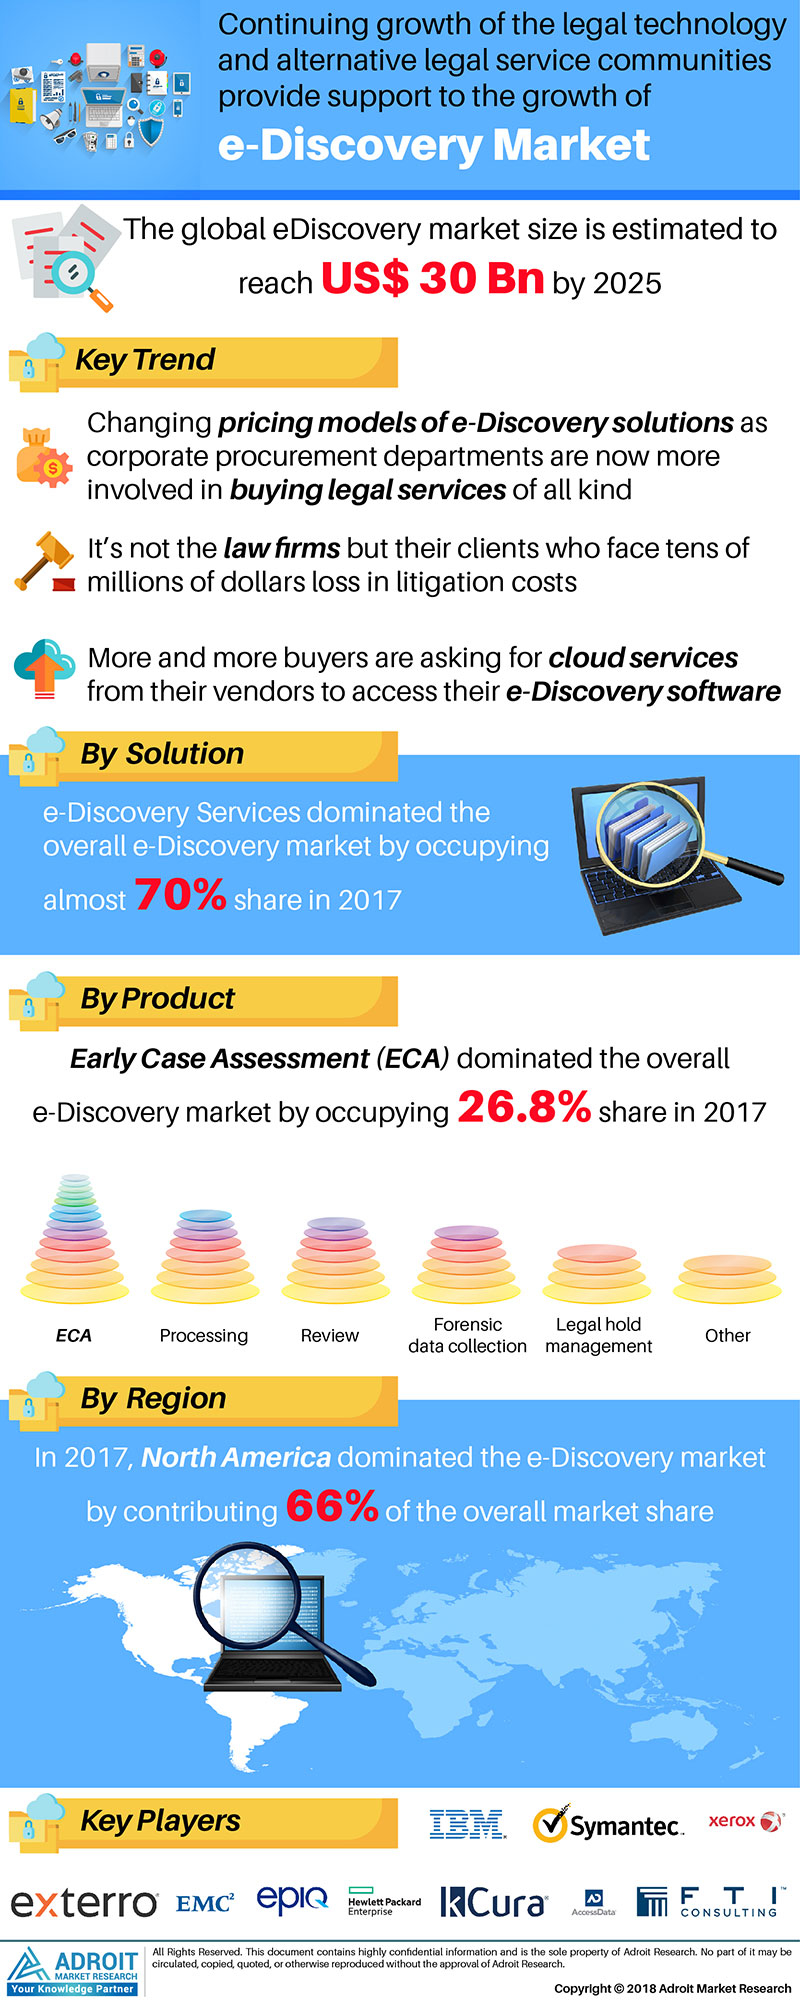 E-discovery Market Update 2018, Overview 2025 by Emerging Trends, Technology Growth, Key Functions, Applications, Regional Demand and Top Companies Analysis 1